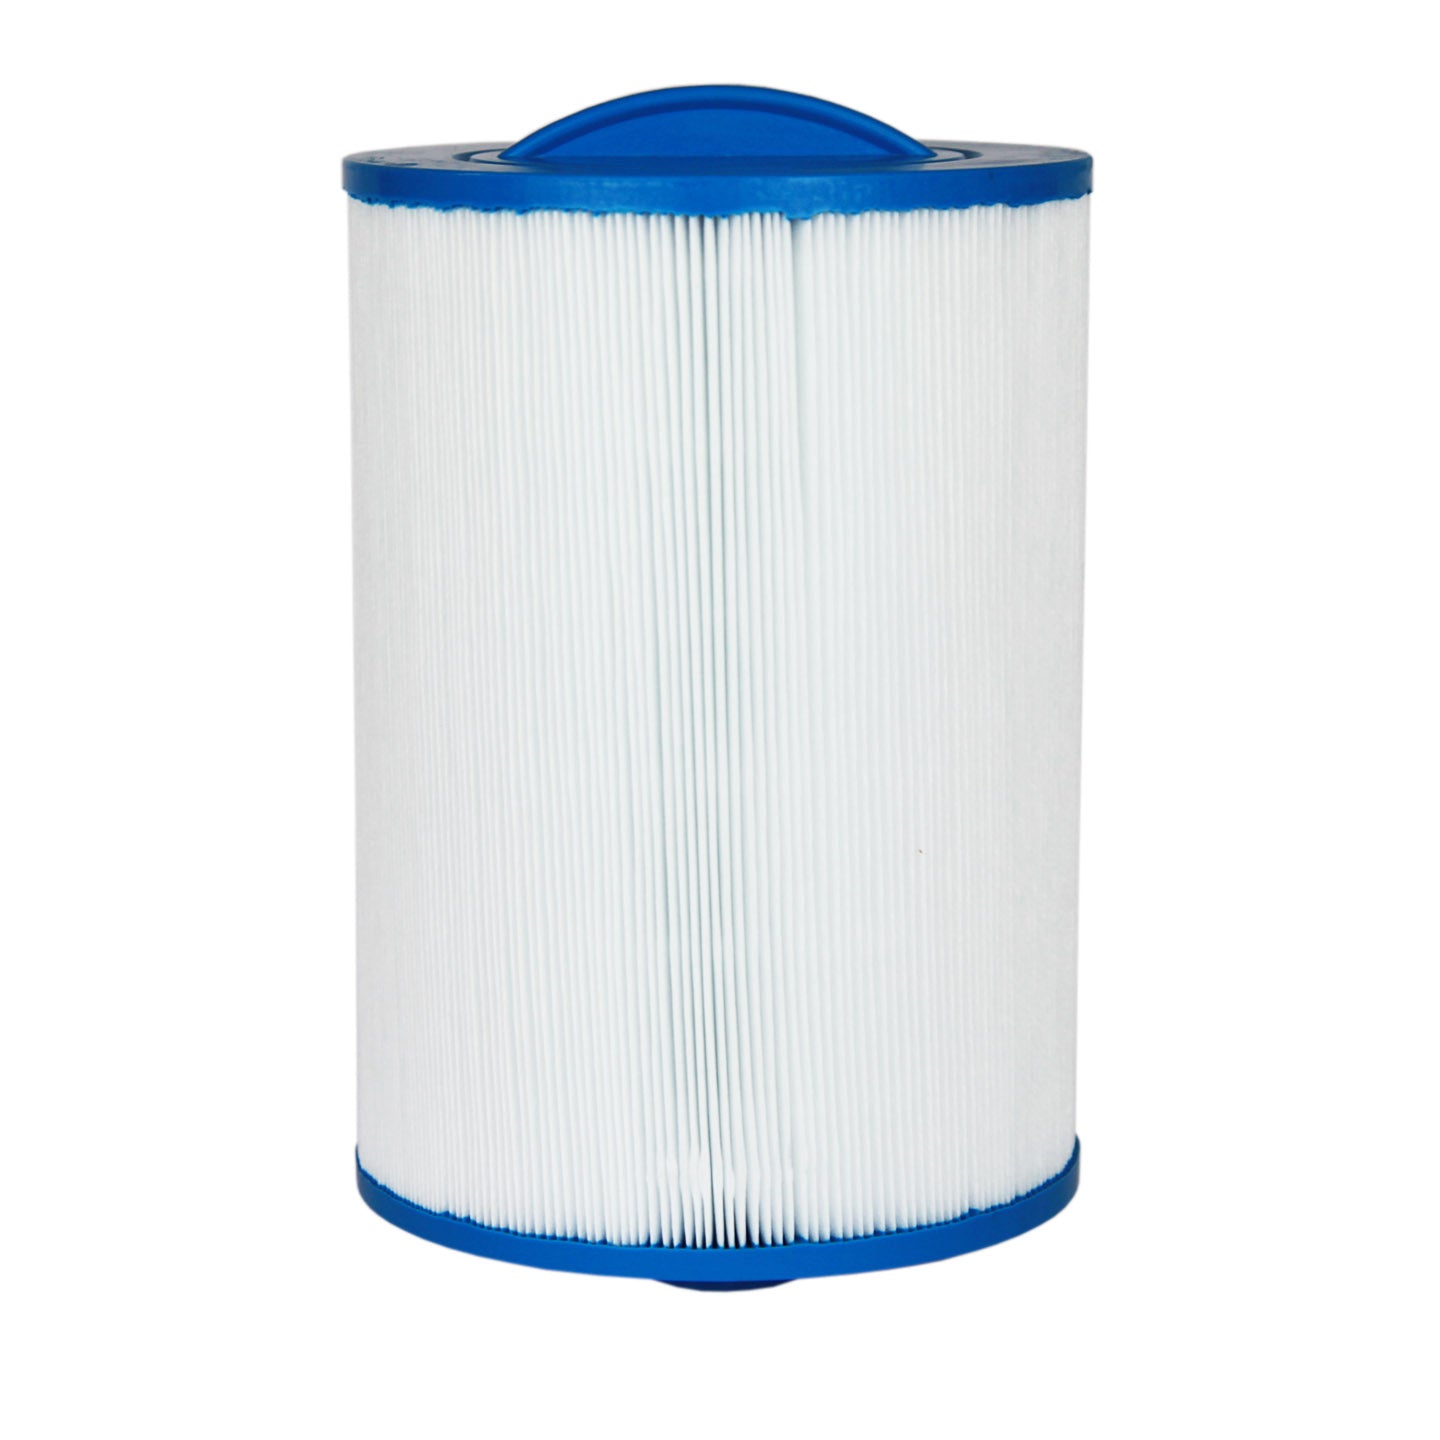 Waterway 817-0050 Pool and Spa Filter Replacement by Tier1 (No Label)